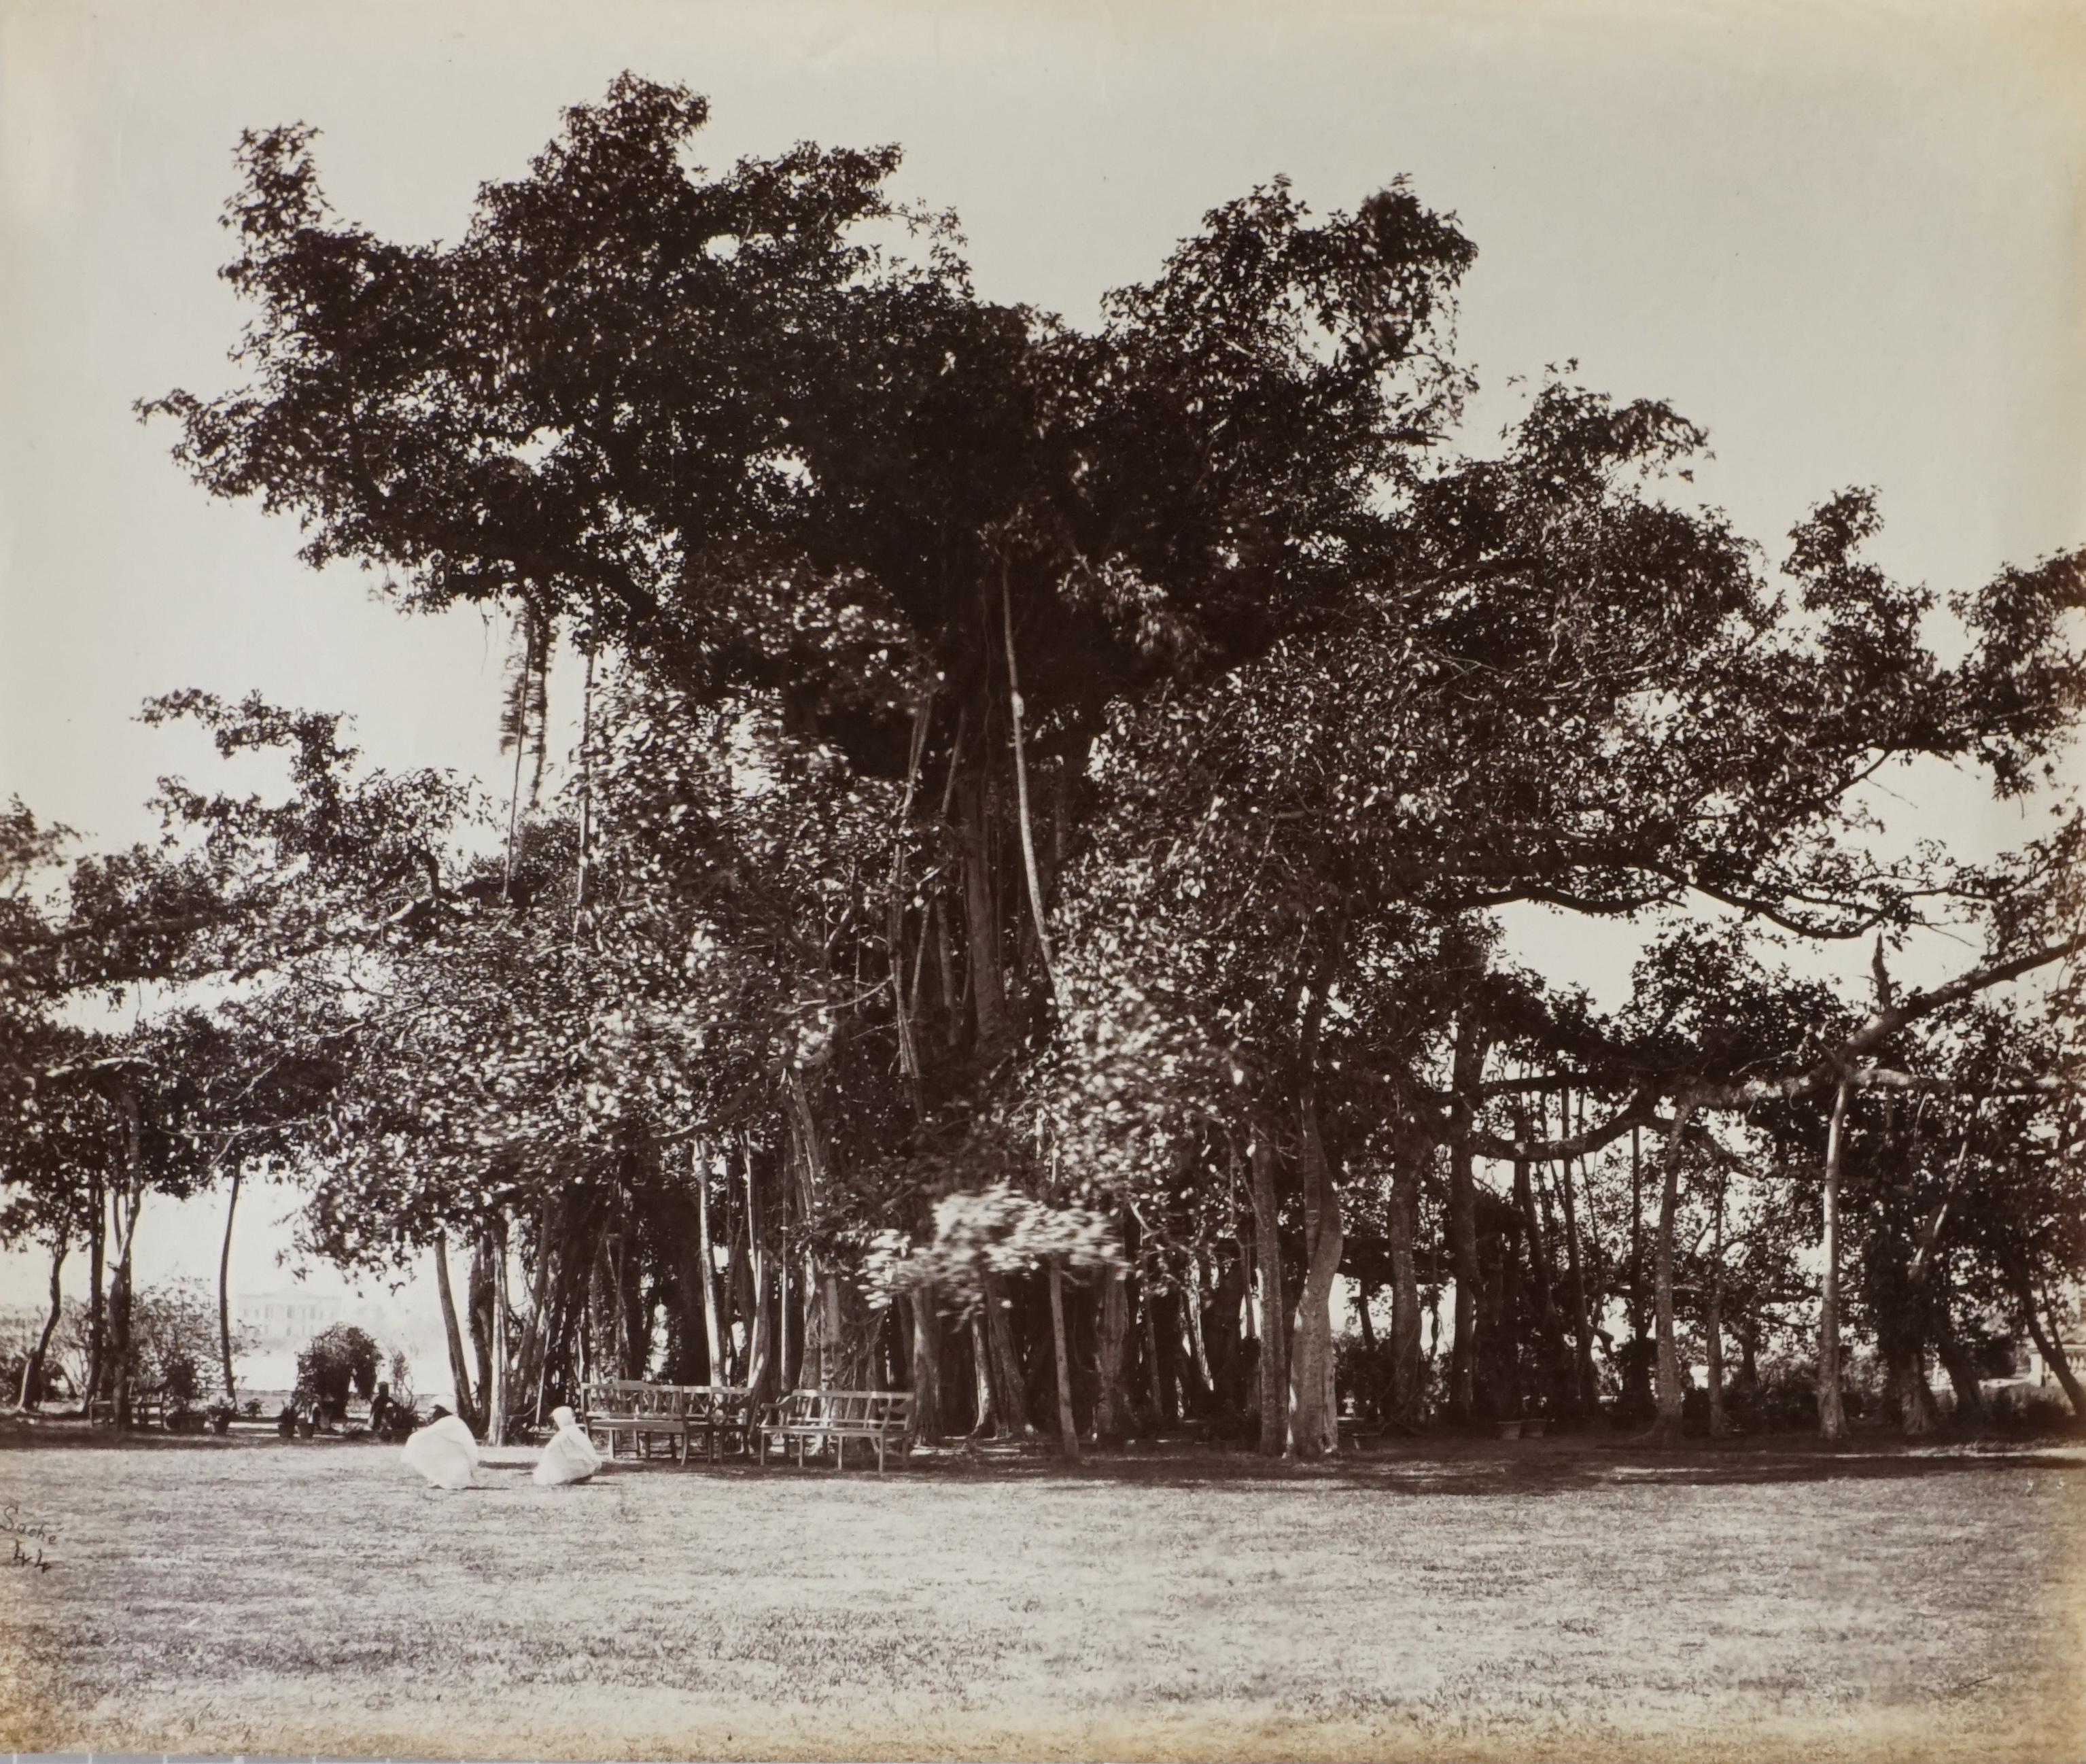 Calcutta; Banian Tree at Government House, Barrackpore, 1870s